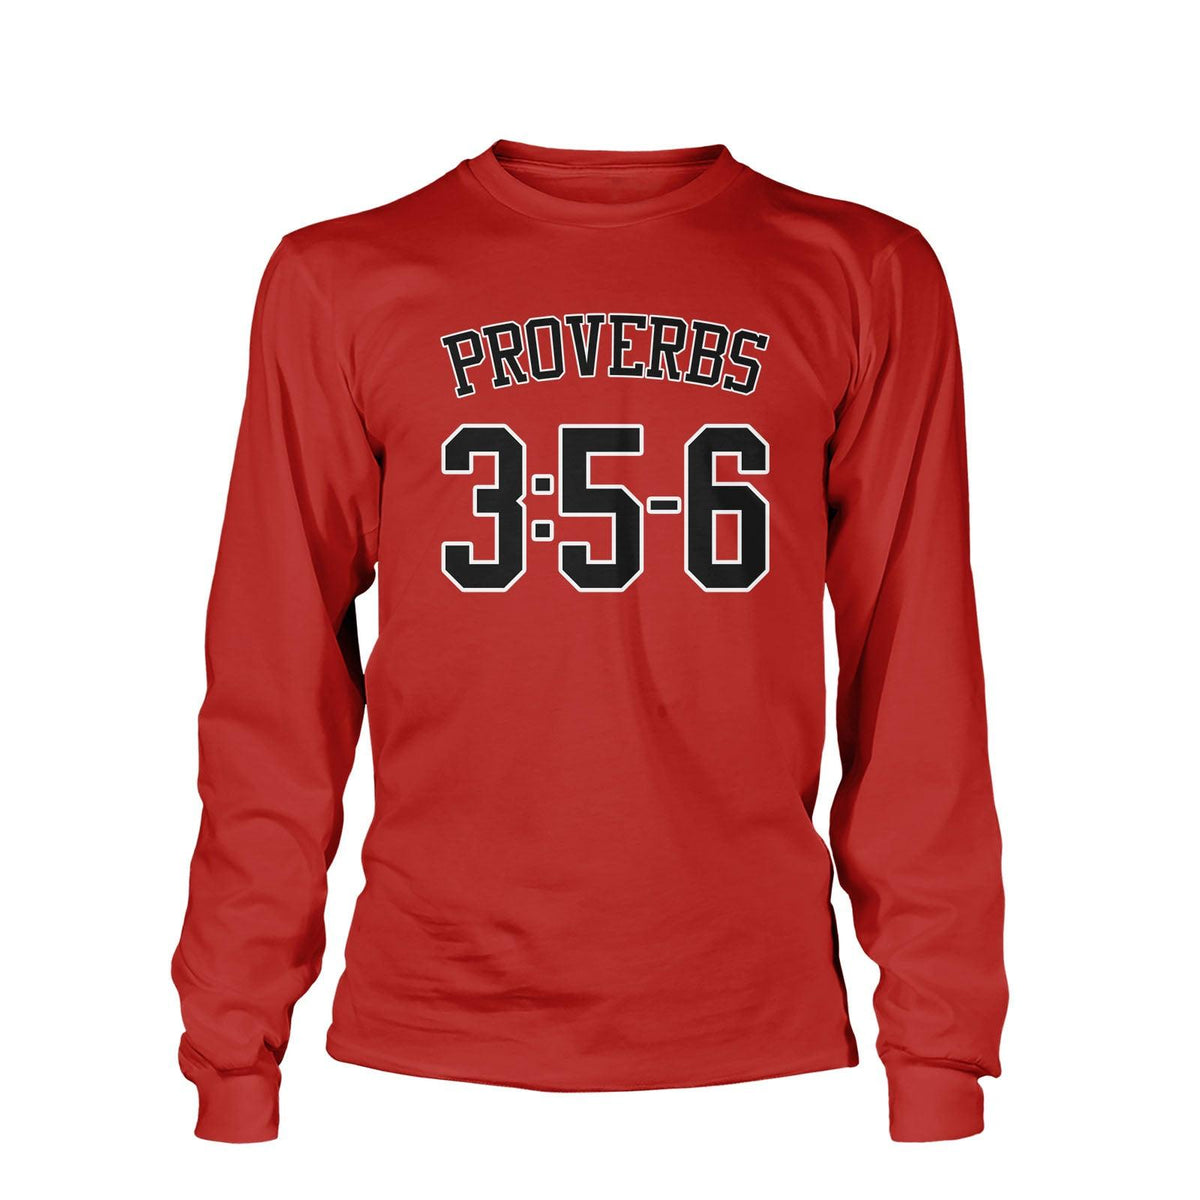 Proverbs 3:5-6 Football Long-Sleeves - Our True God